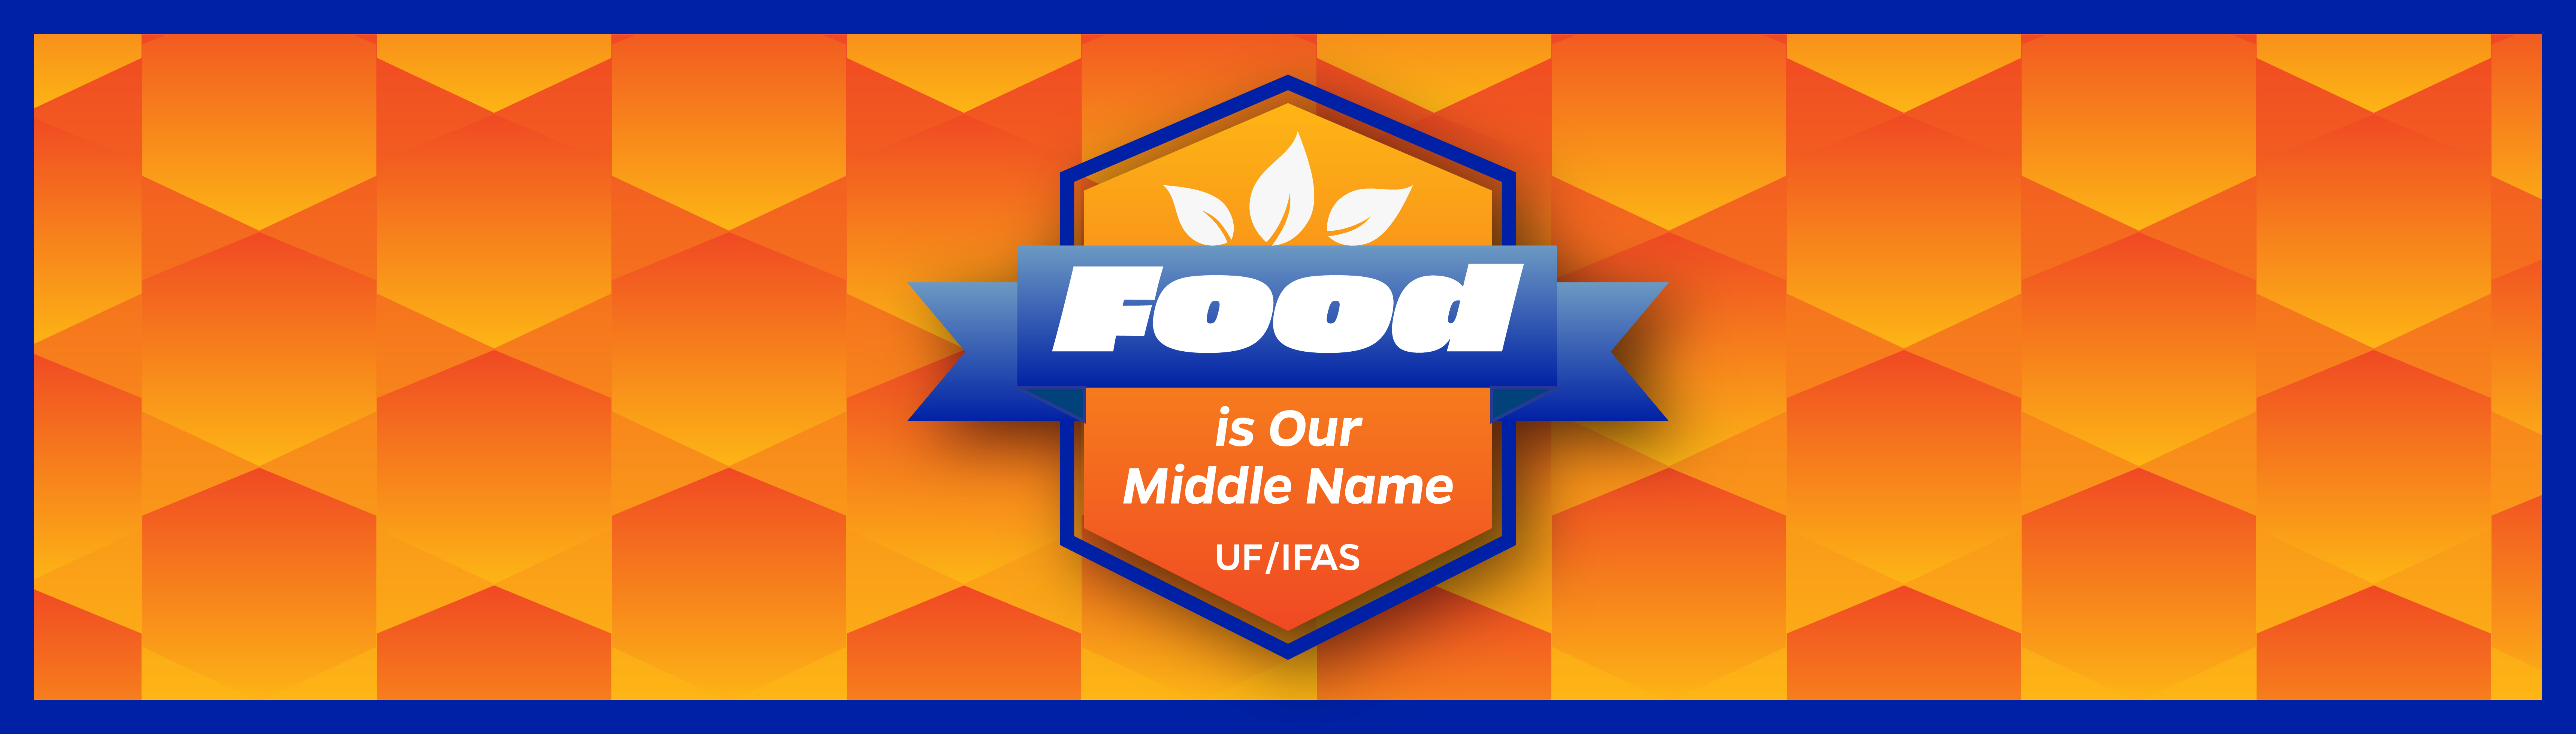 UF/IFAS - Food Is Our Middle Name Banner Graphic